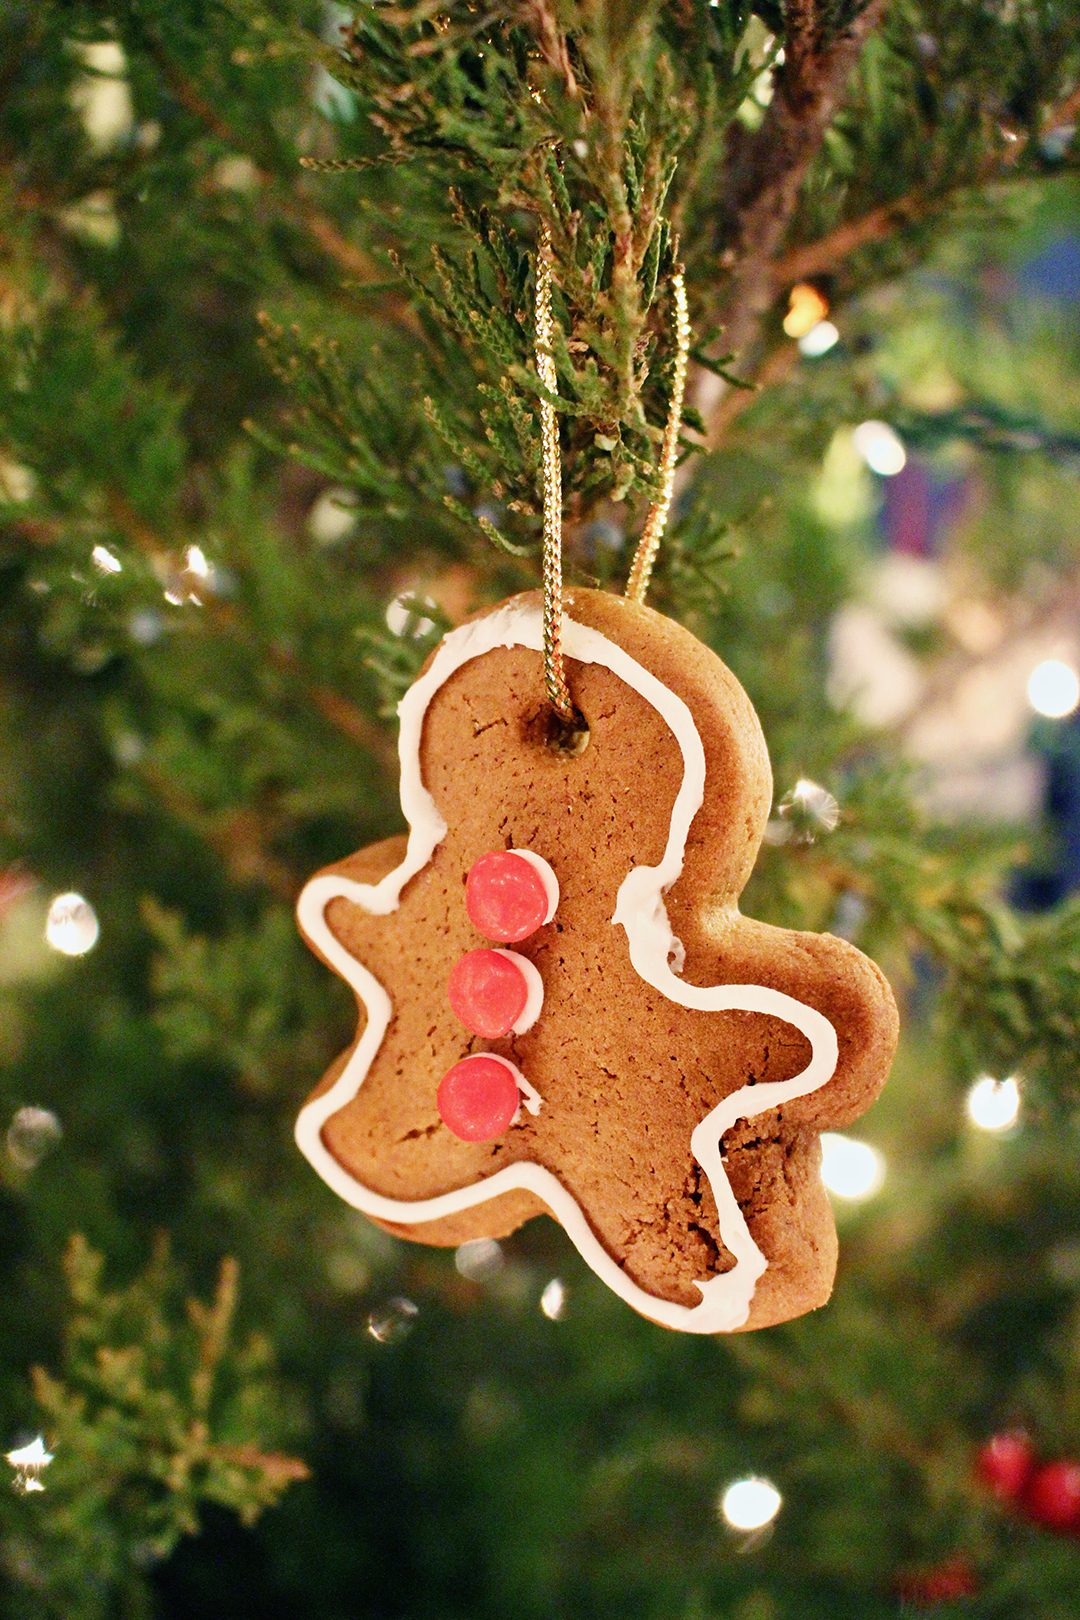 A gingerbread man cookie ornament hanging on a Christmas tree, decorated with white icing and red hot candies for buttons. 